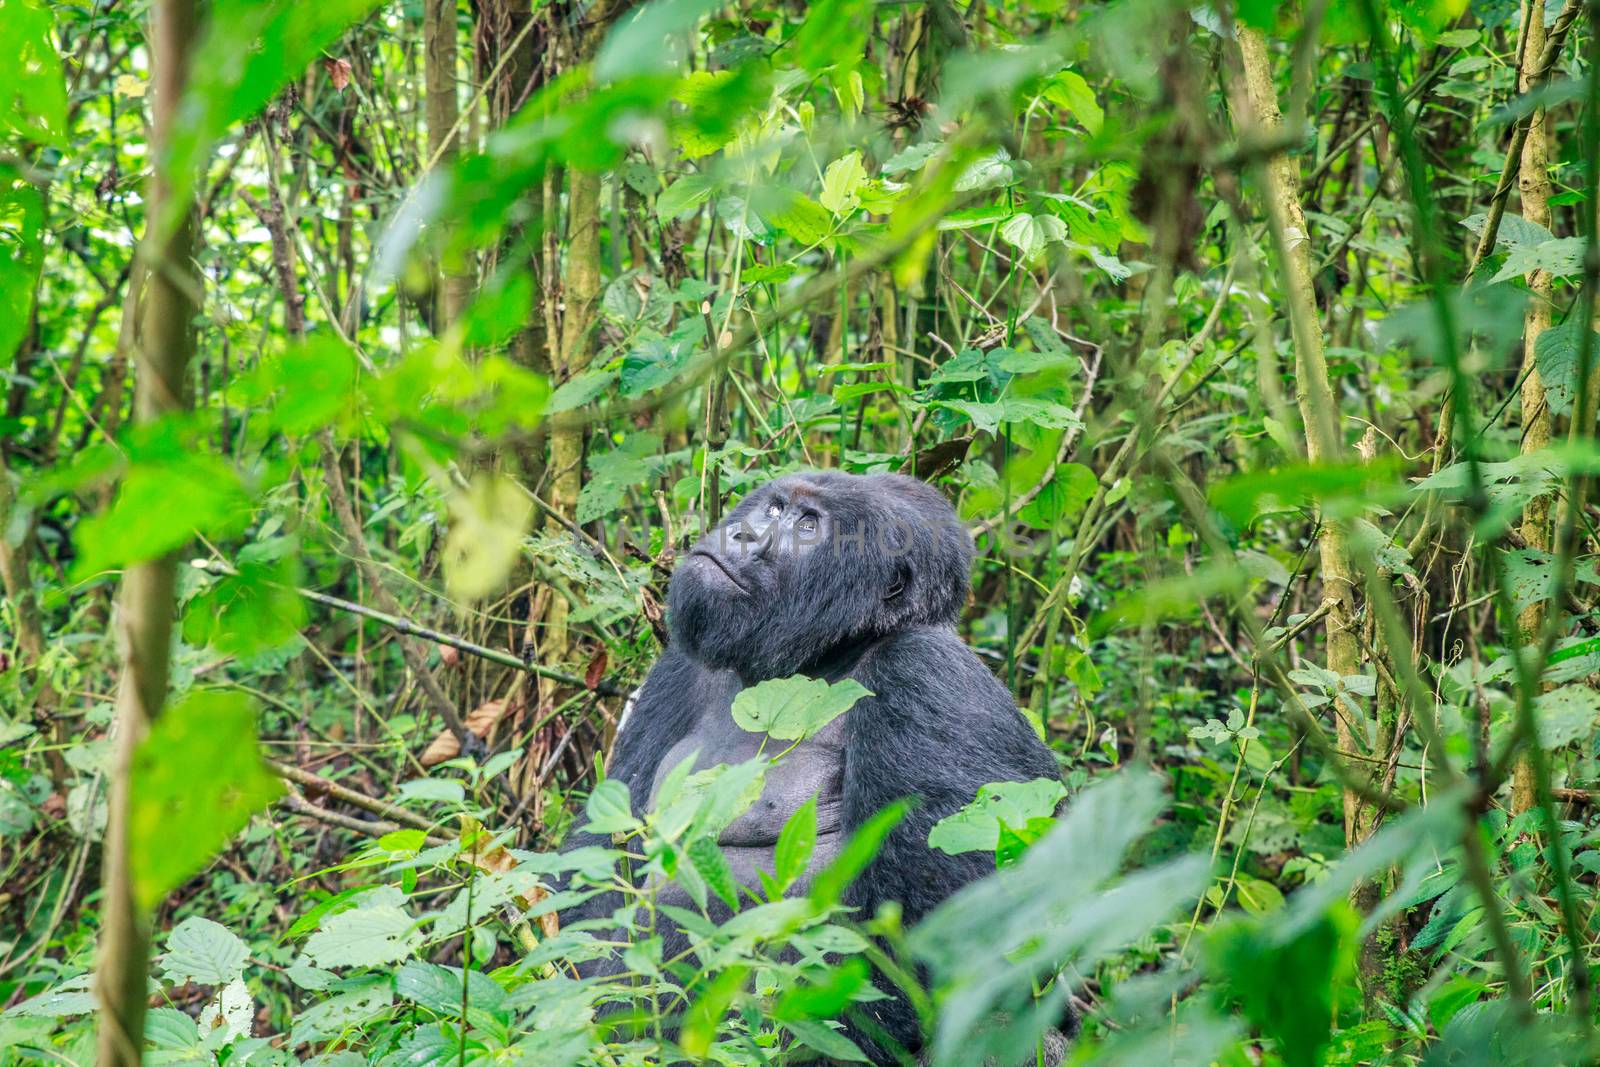 Silverback Mountain gorilla sitting in leaves in the Virunga National Park, Democratic Republic Of Congo.